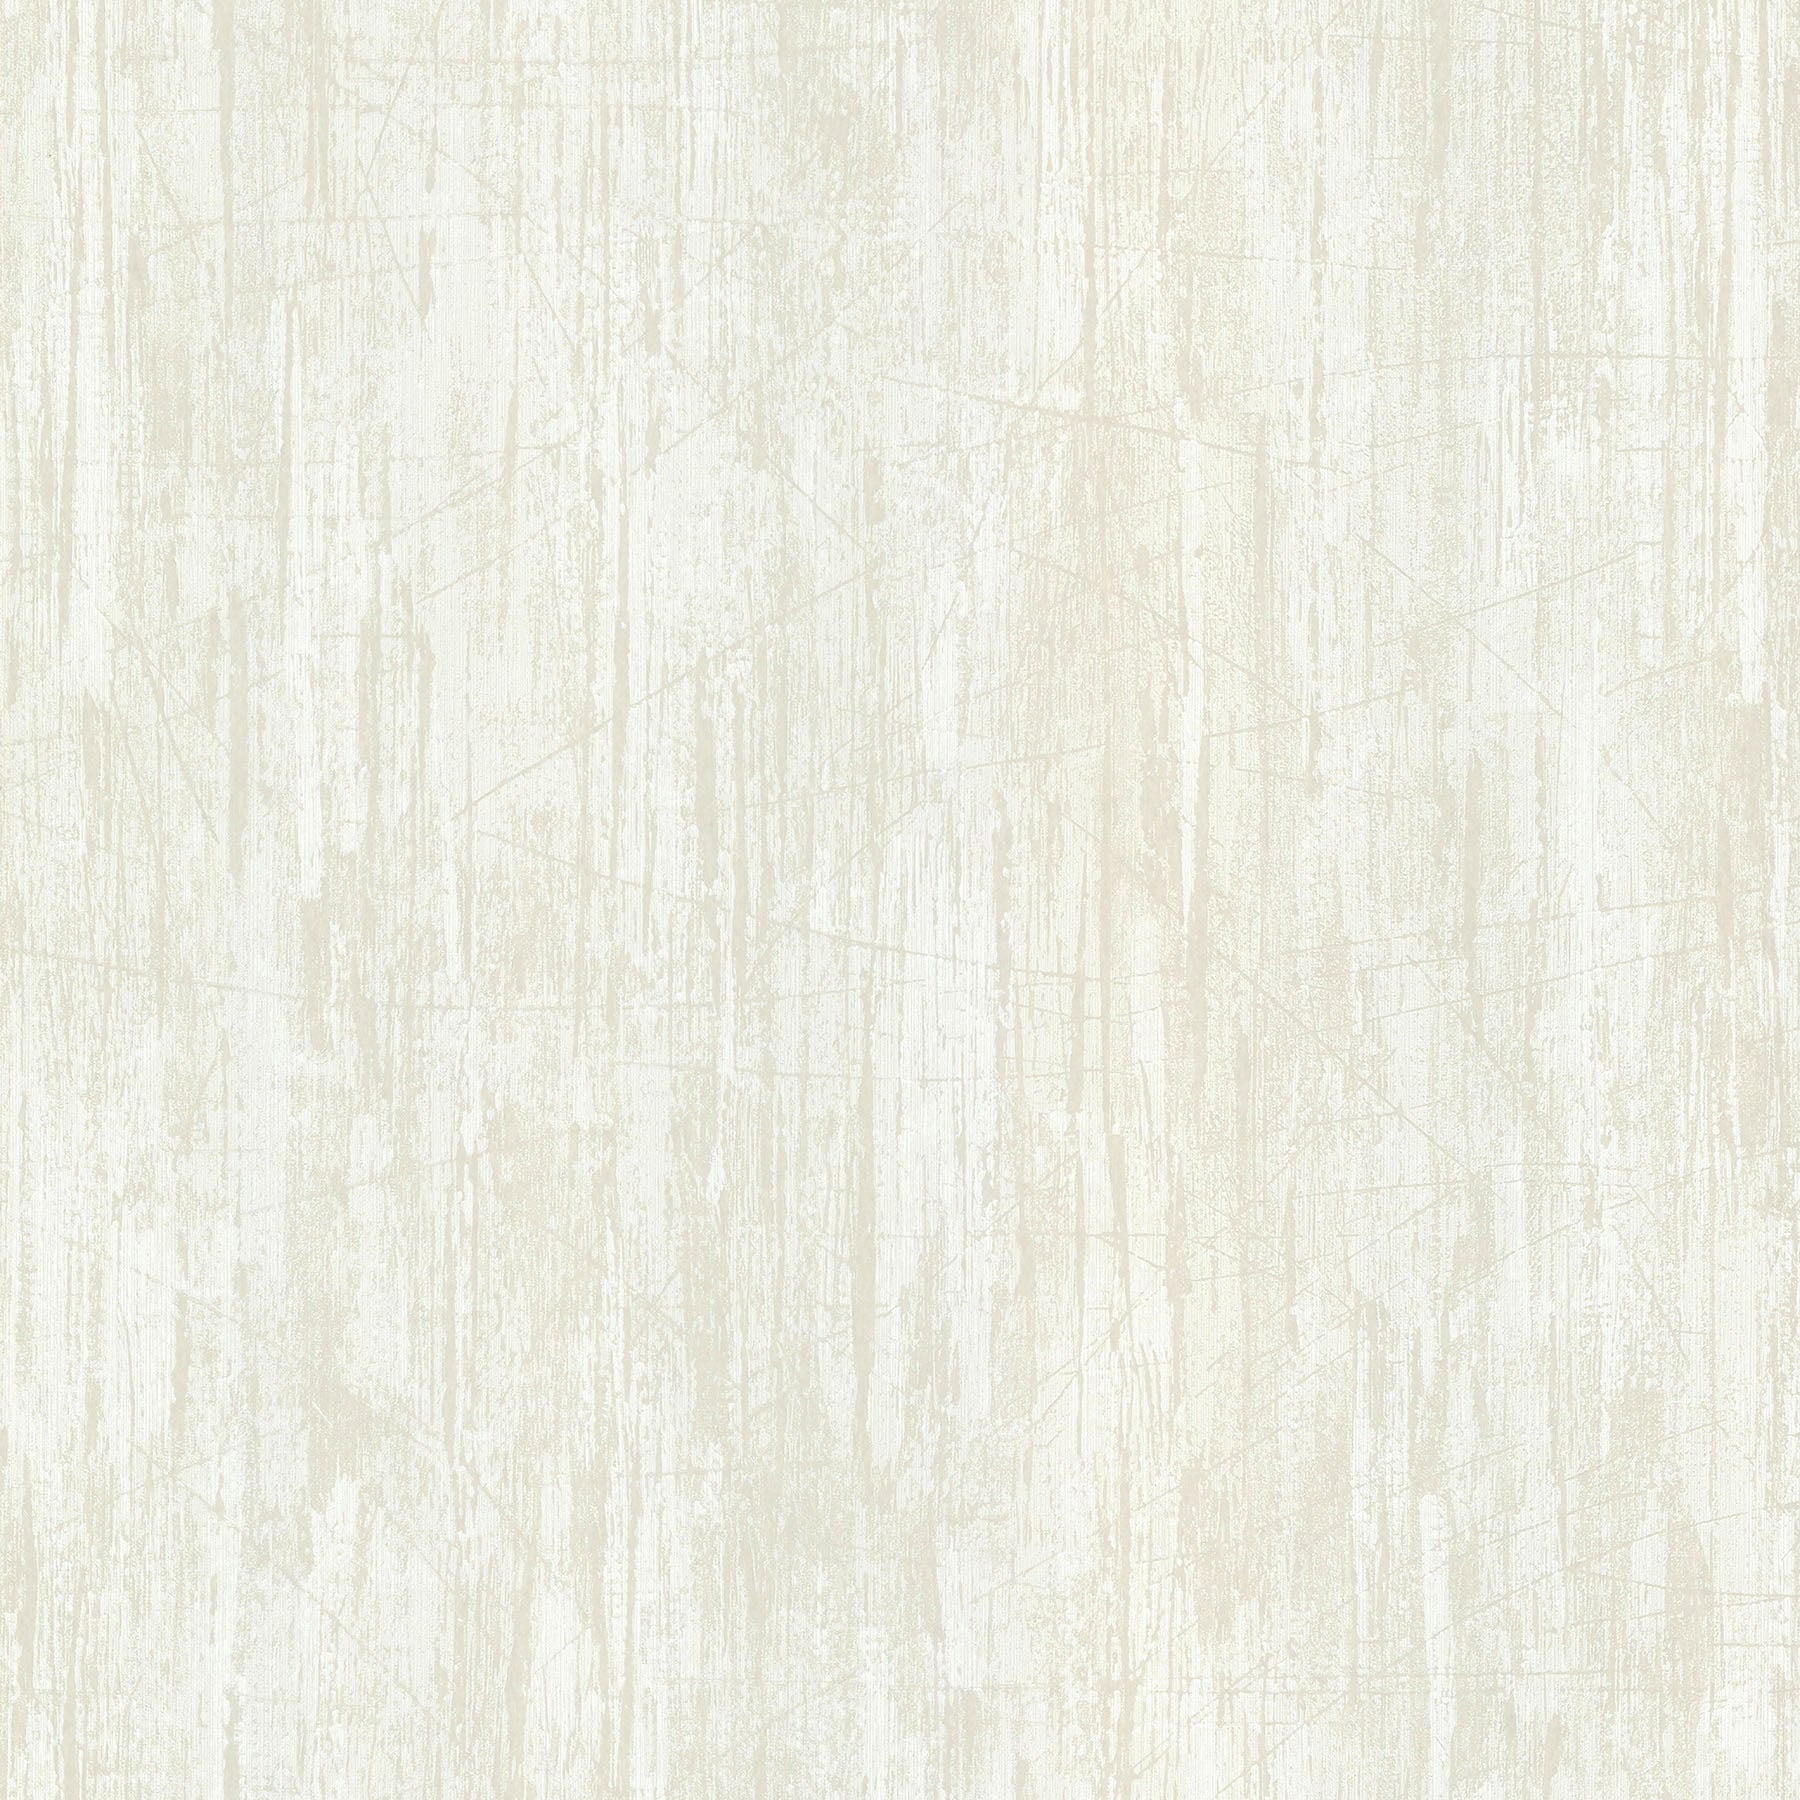 Save 2774-480917 Stones & Woods Neutrals Wood Paneling Wallpaper by Advantage